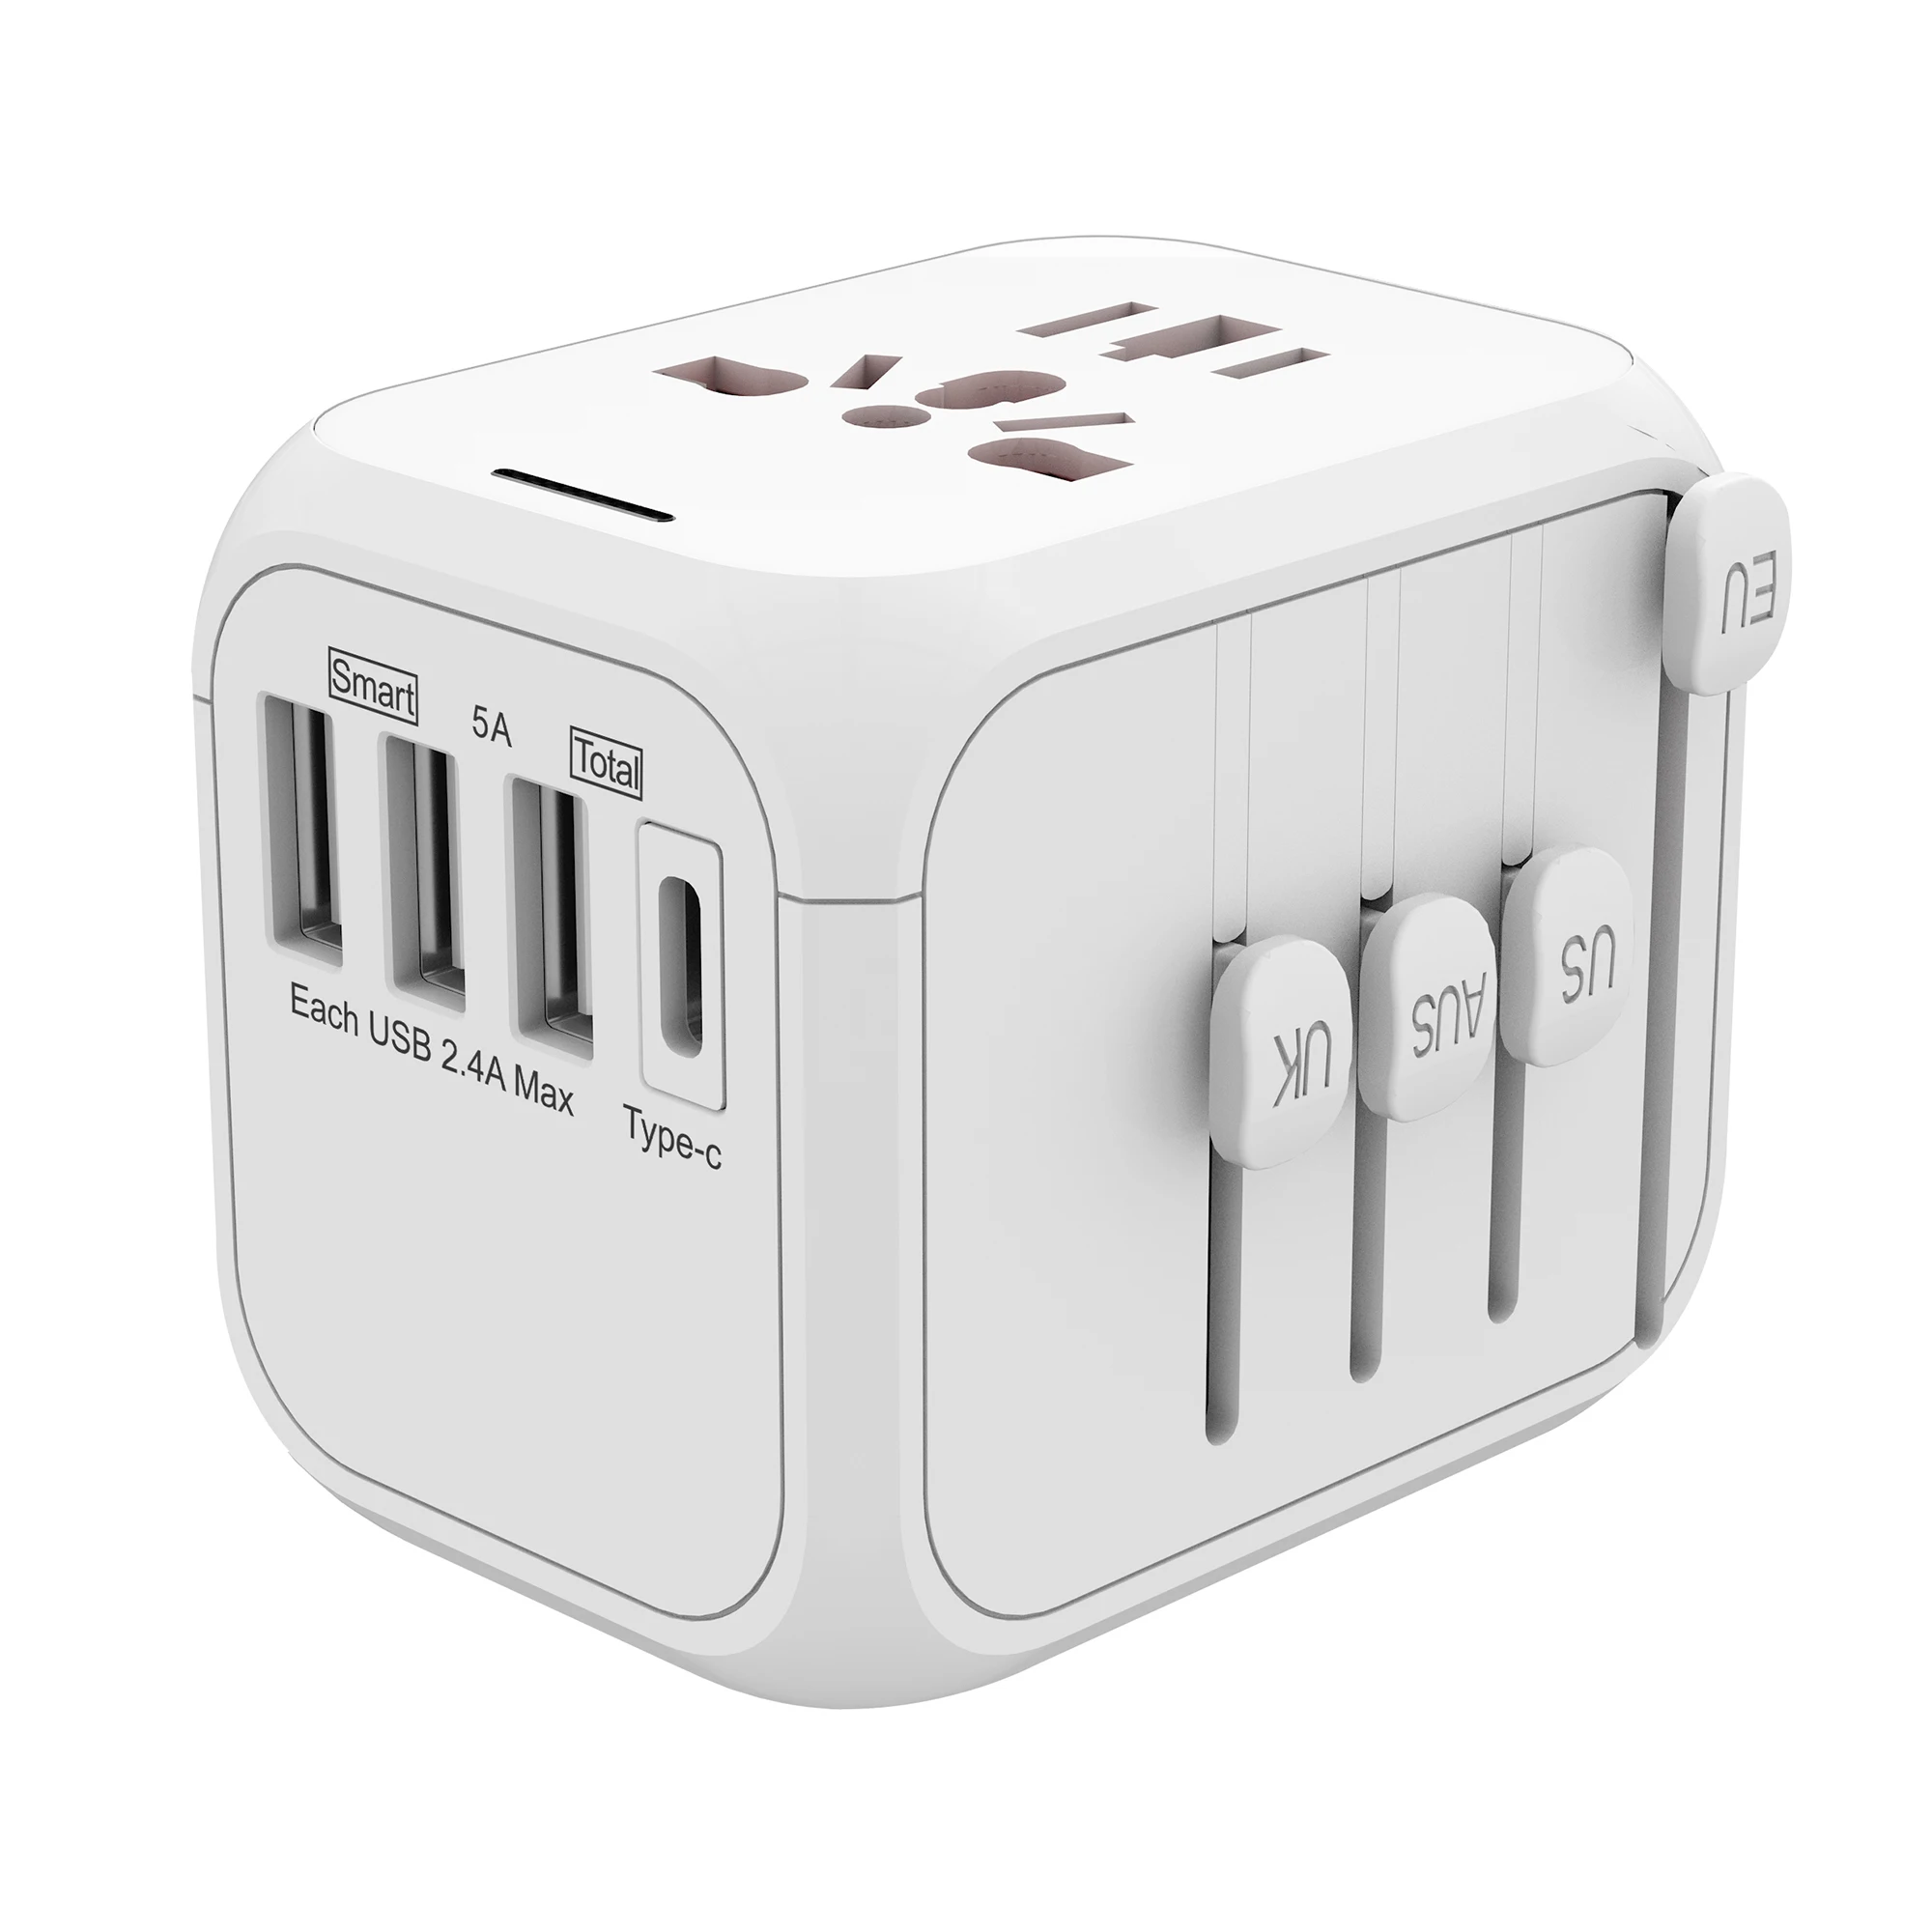 Mobile phone accessories multi-nation travel power adapter world universal travel adaptor with 4 USB charger For EU UK US AUS